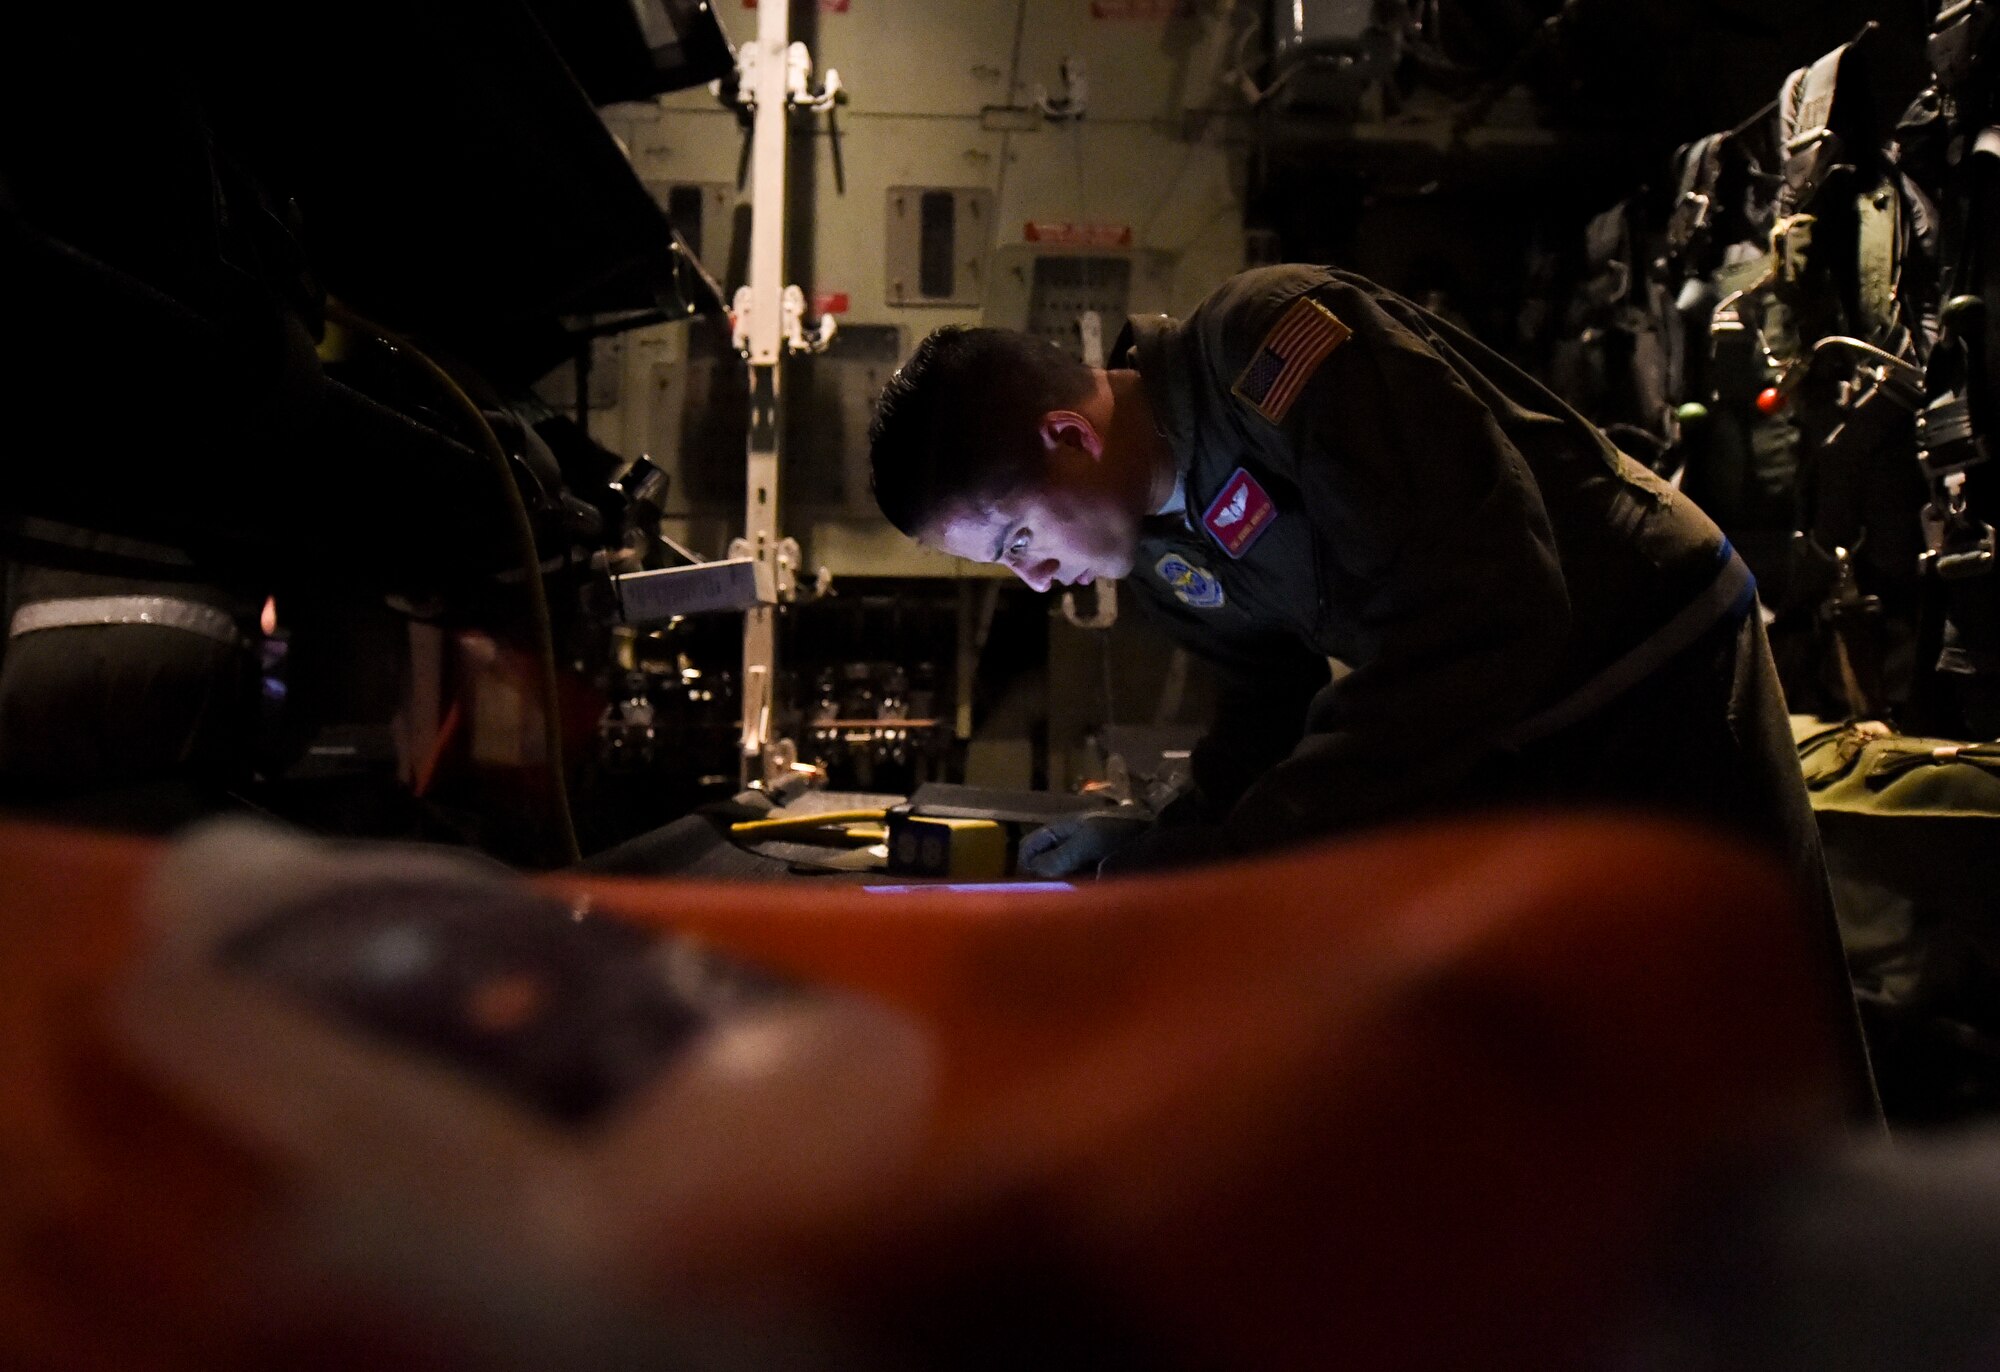 U.S. Air Force Tech. Sgt. Manuel Montaovo, 375th Aeromedical Evacuation Squadron air evacuation technician, conducts a pre-flight check of the unitron frequency converter during exercise Tropical Storm Greg, Nov. 8, 2016, at Little Rock Air Force Base, Ark. The unitron frequency converter allows medical equipment to be connected to the aircraft to assist injured personnel. (U.S. Air Force photo by Senior Airman Stephanie Serrano)